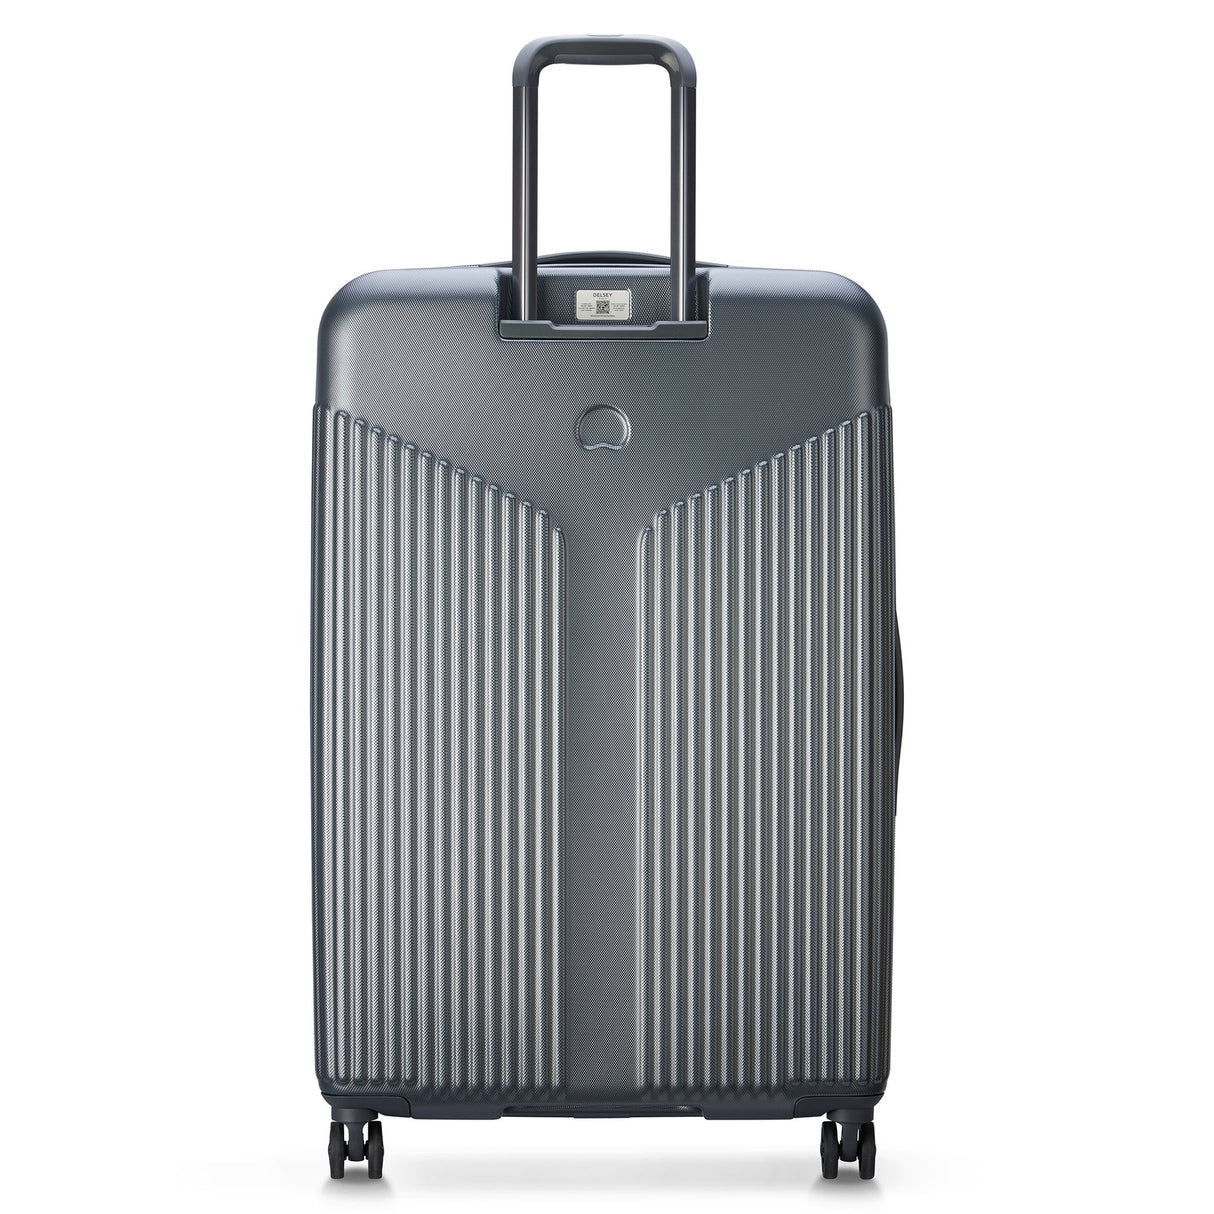 Delsey Comete 3.0 Large Expandable Spinner , , delsey-comete-3.0-40387983001SI-03_1800x1800_5f824408-13b2-4d85-873b-0584ab3675d2